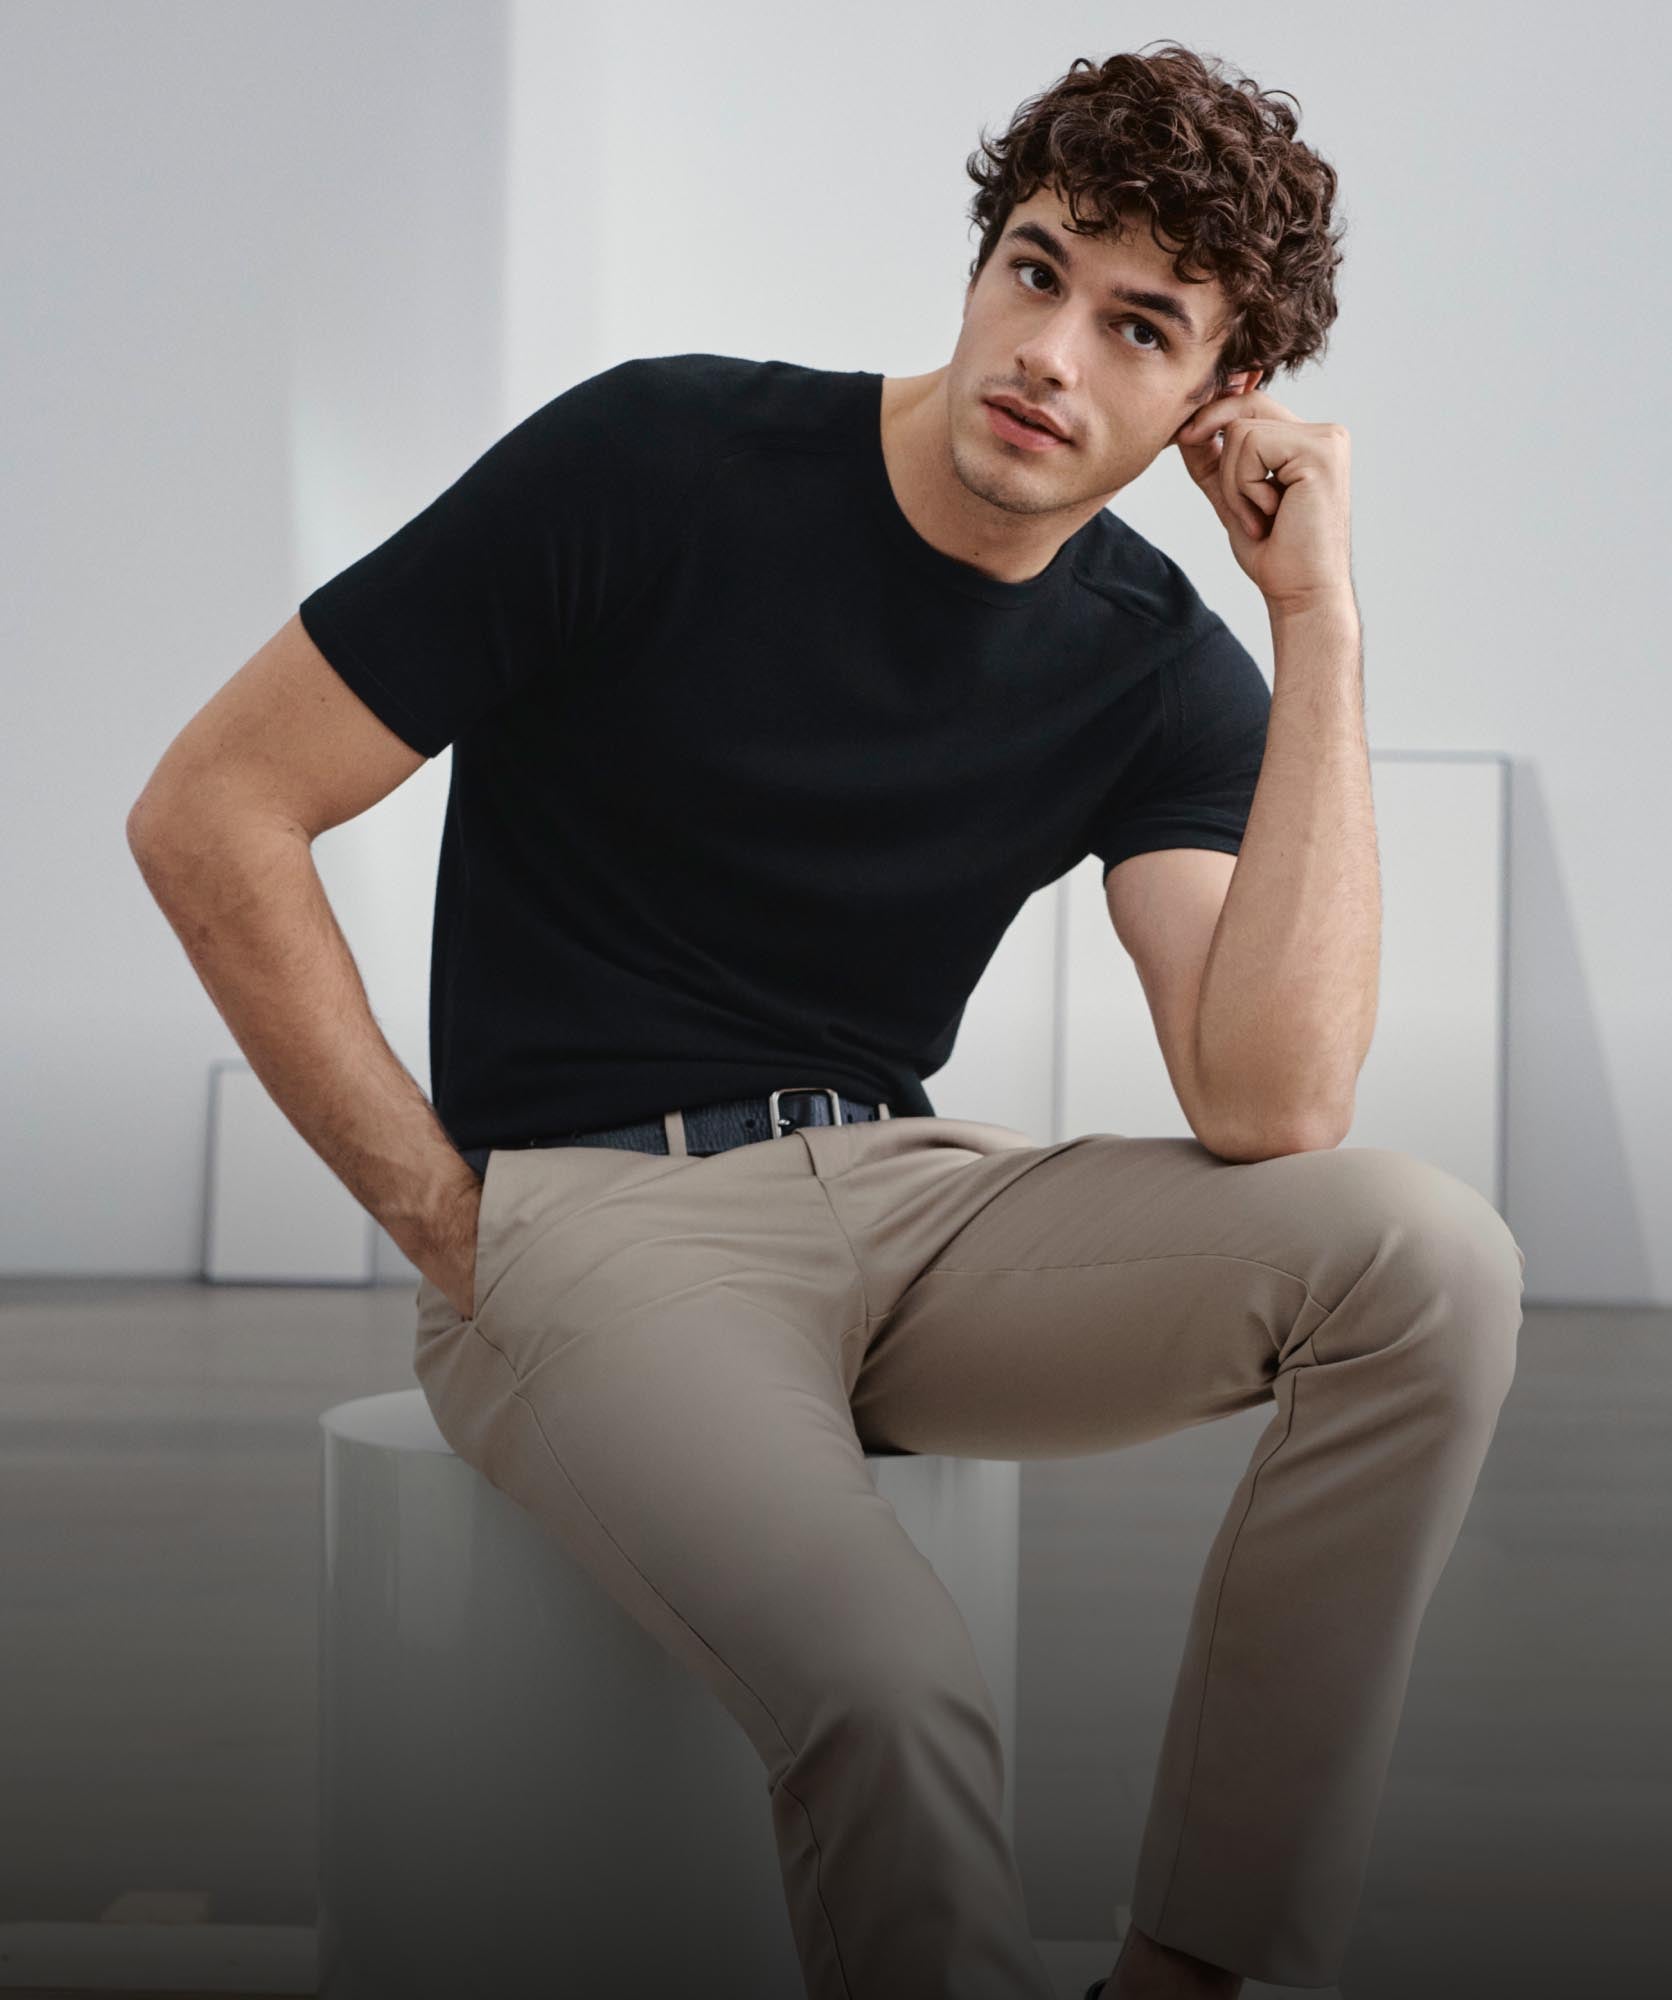 A model sitting down, posing with his elbow on his knee wearing a black t-shirt and khaki pants